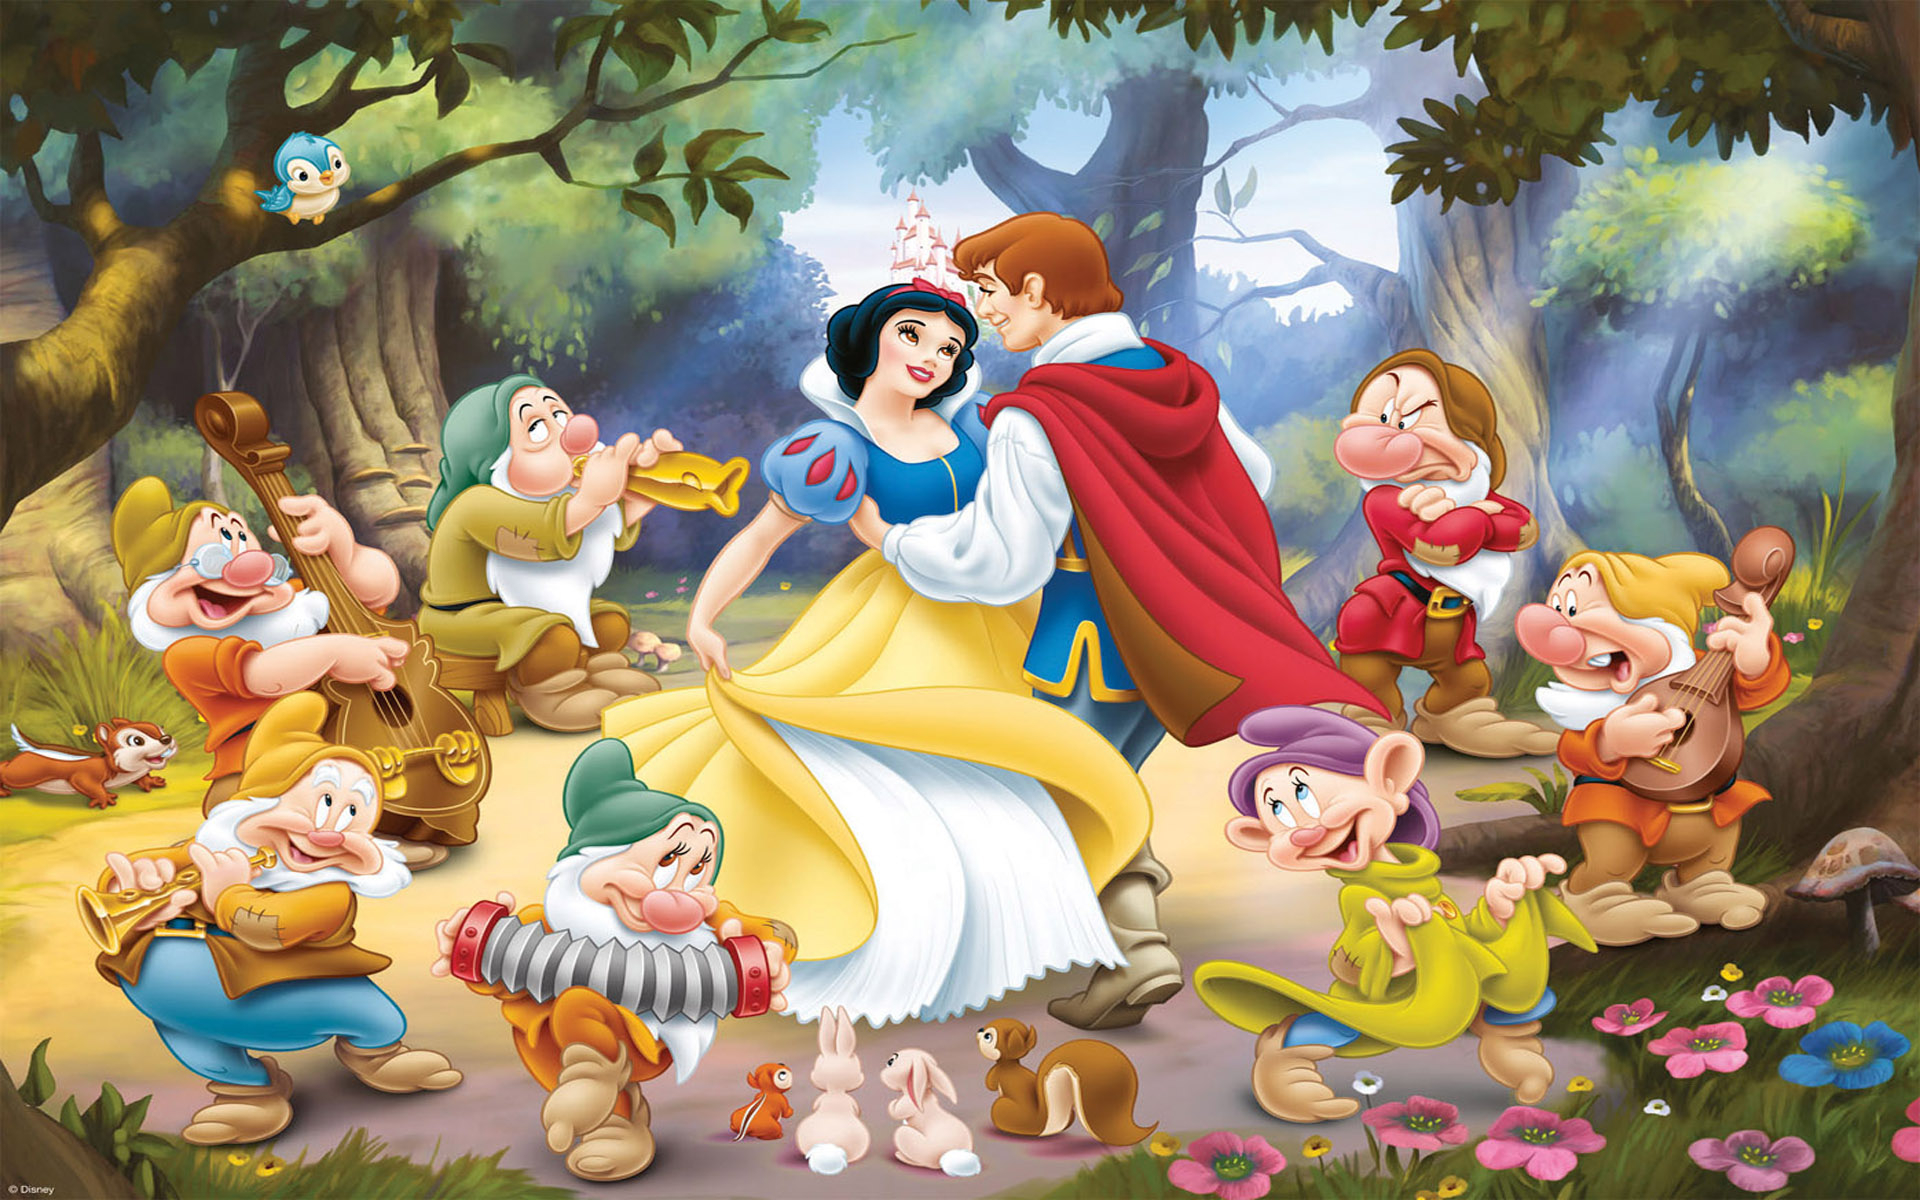 1920x1200 Snow White and- he Seven cartoon Dwarfs Dancing with Prince Charming- wallpaper | | 1403916